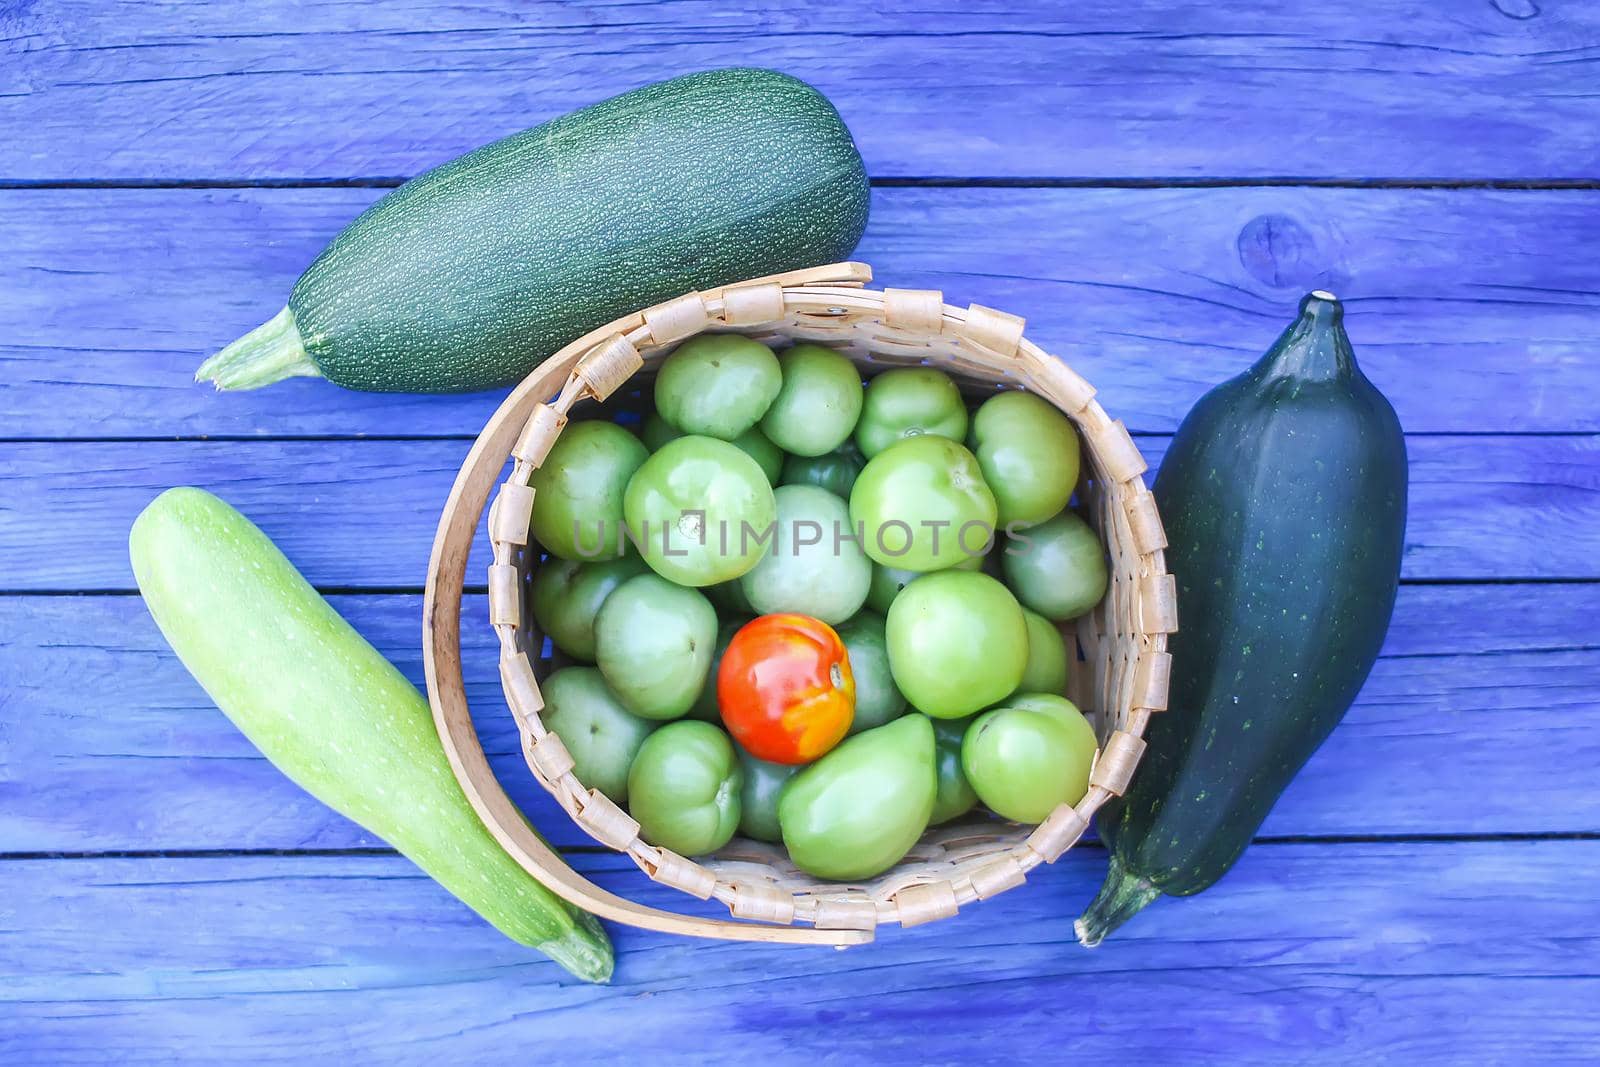 Zucchini and unripe tomatoes on wooden boards outdoors by nightlyviolet